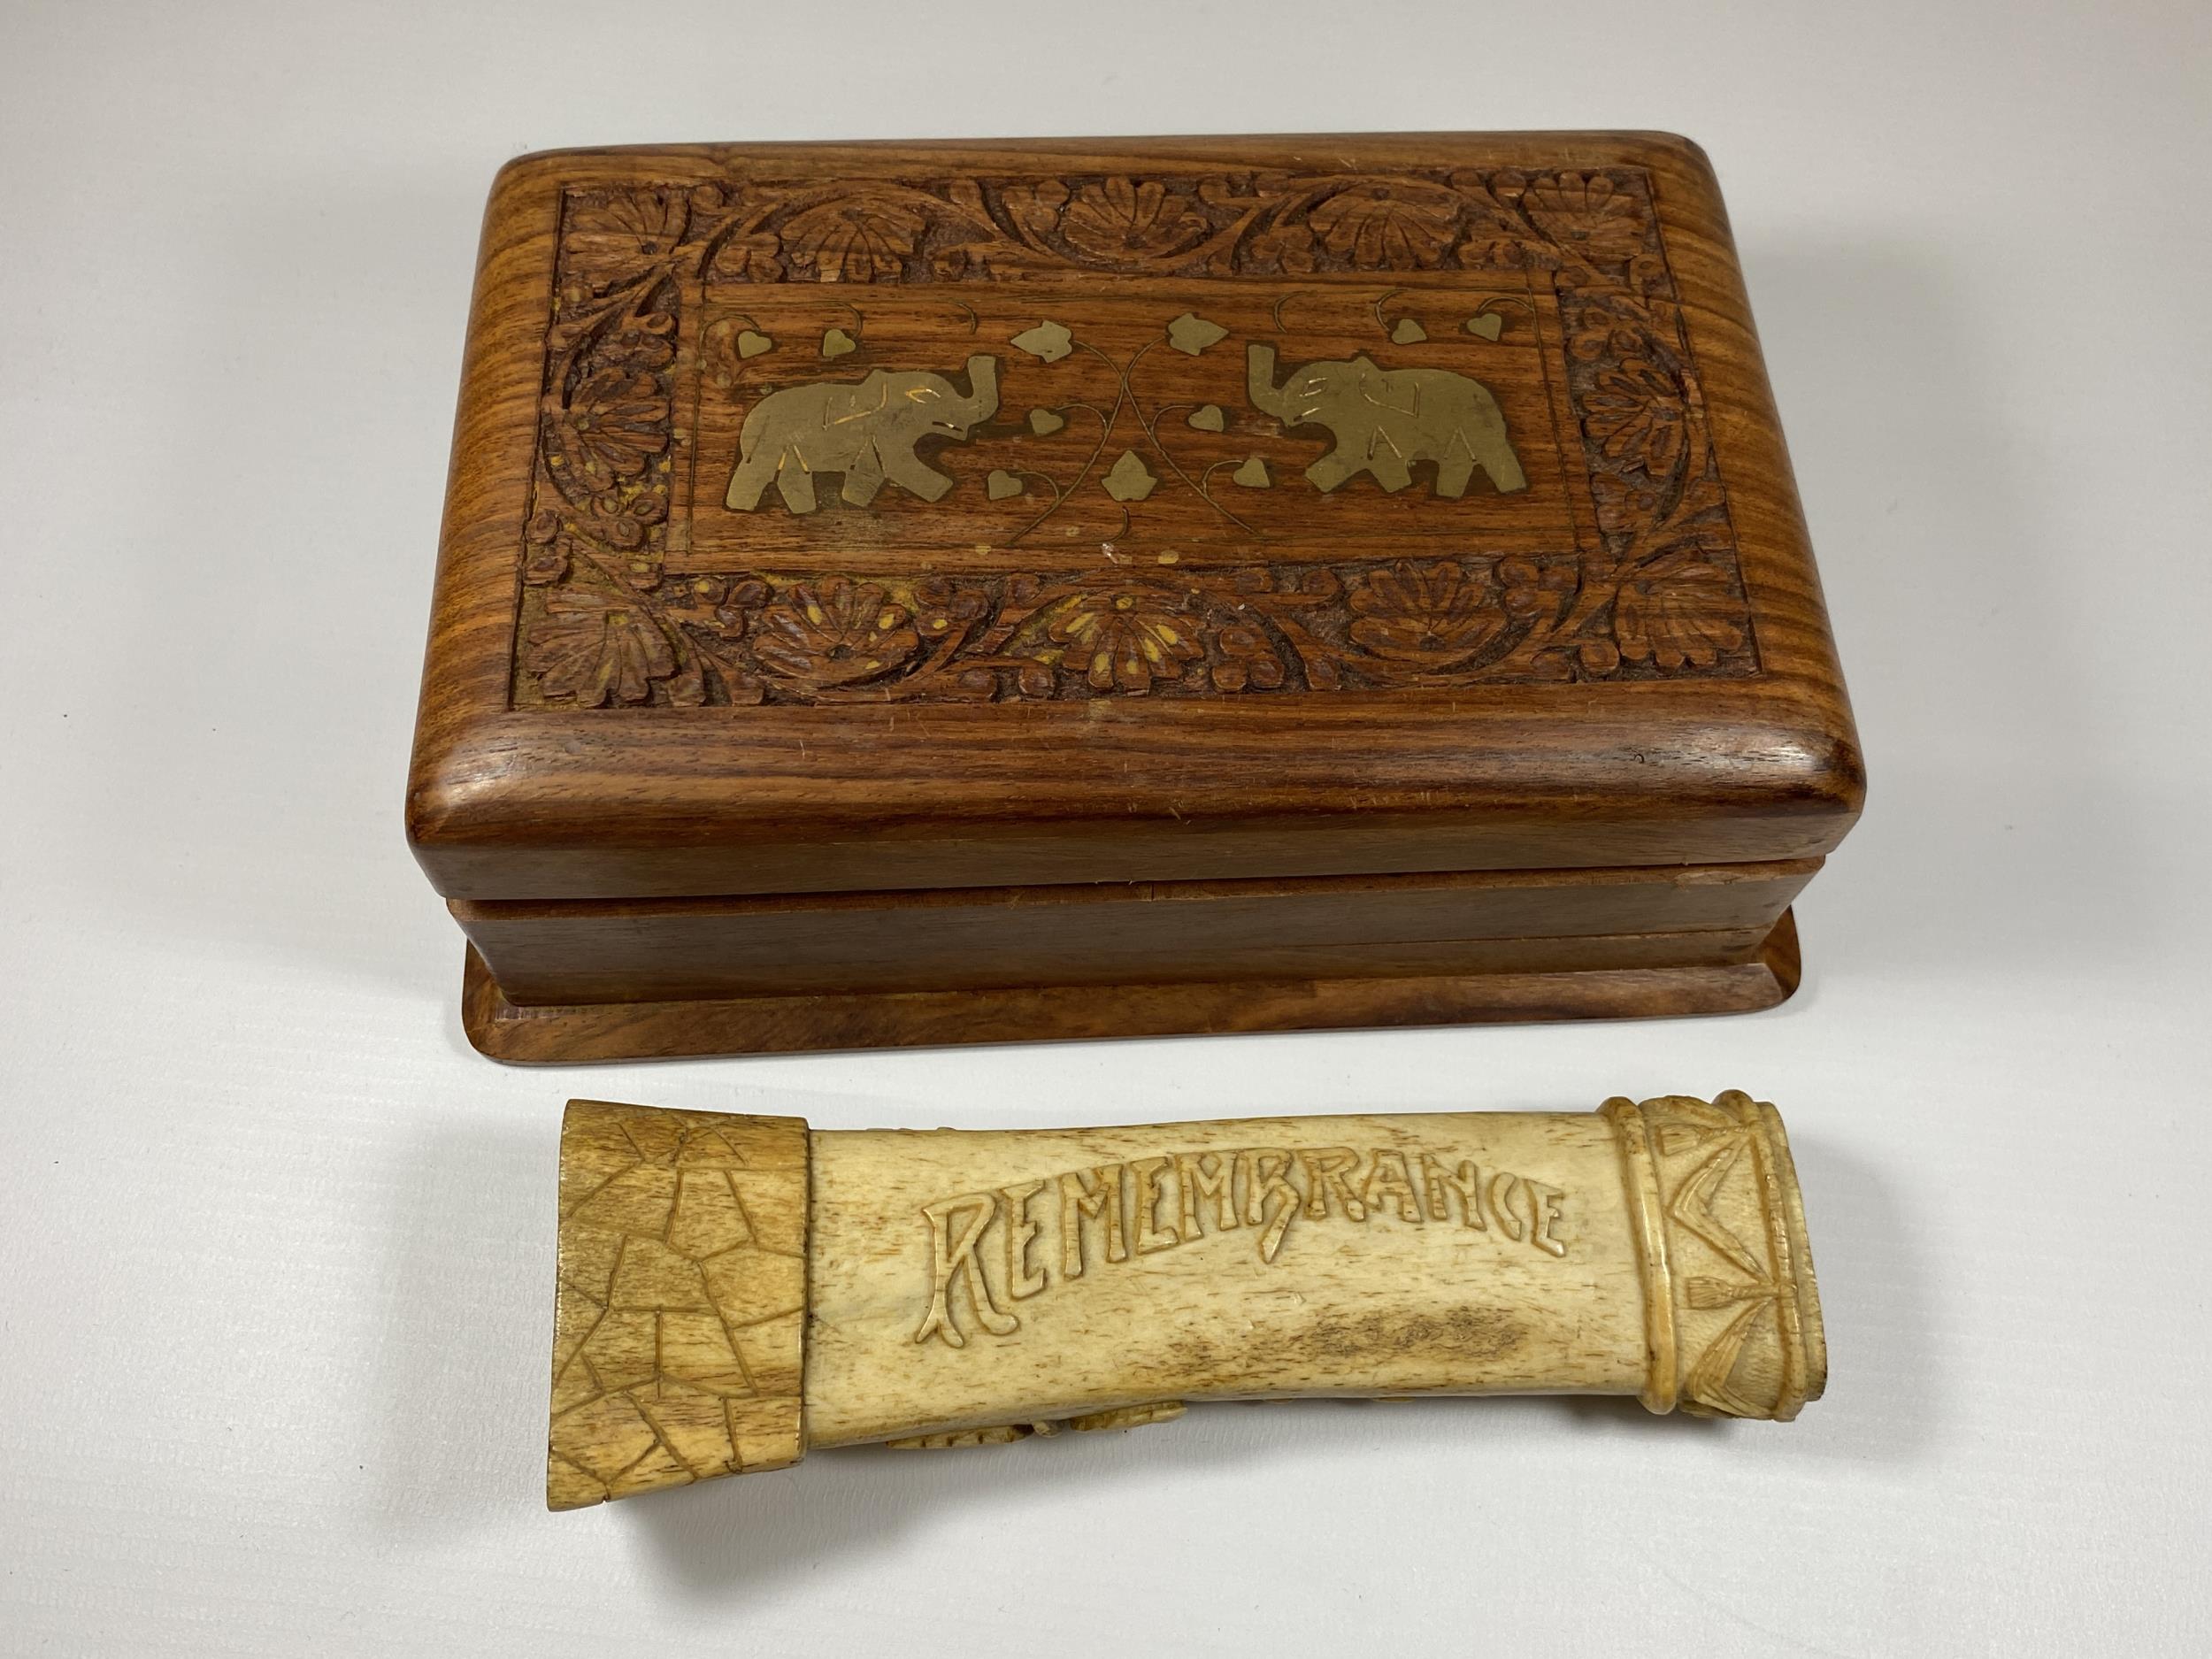 AN ANTIQUE BONE REMEMBRANCE CARVING TOGETHER WITH A CARVED WOODEN BOX